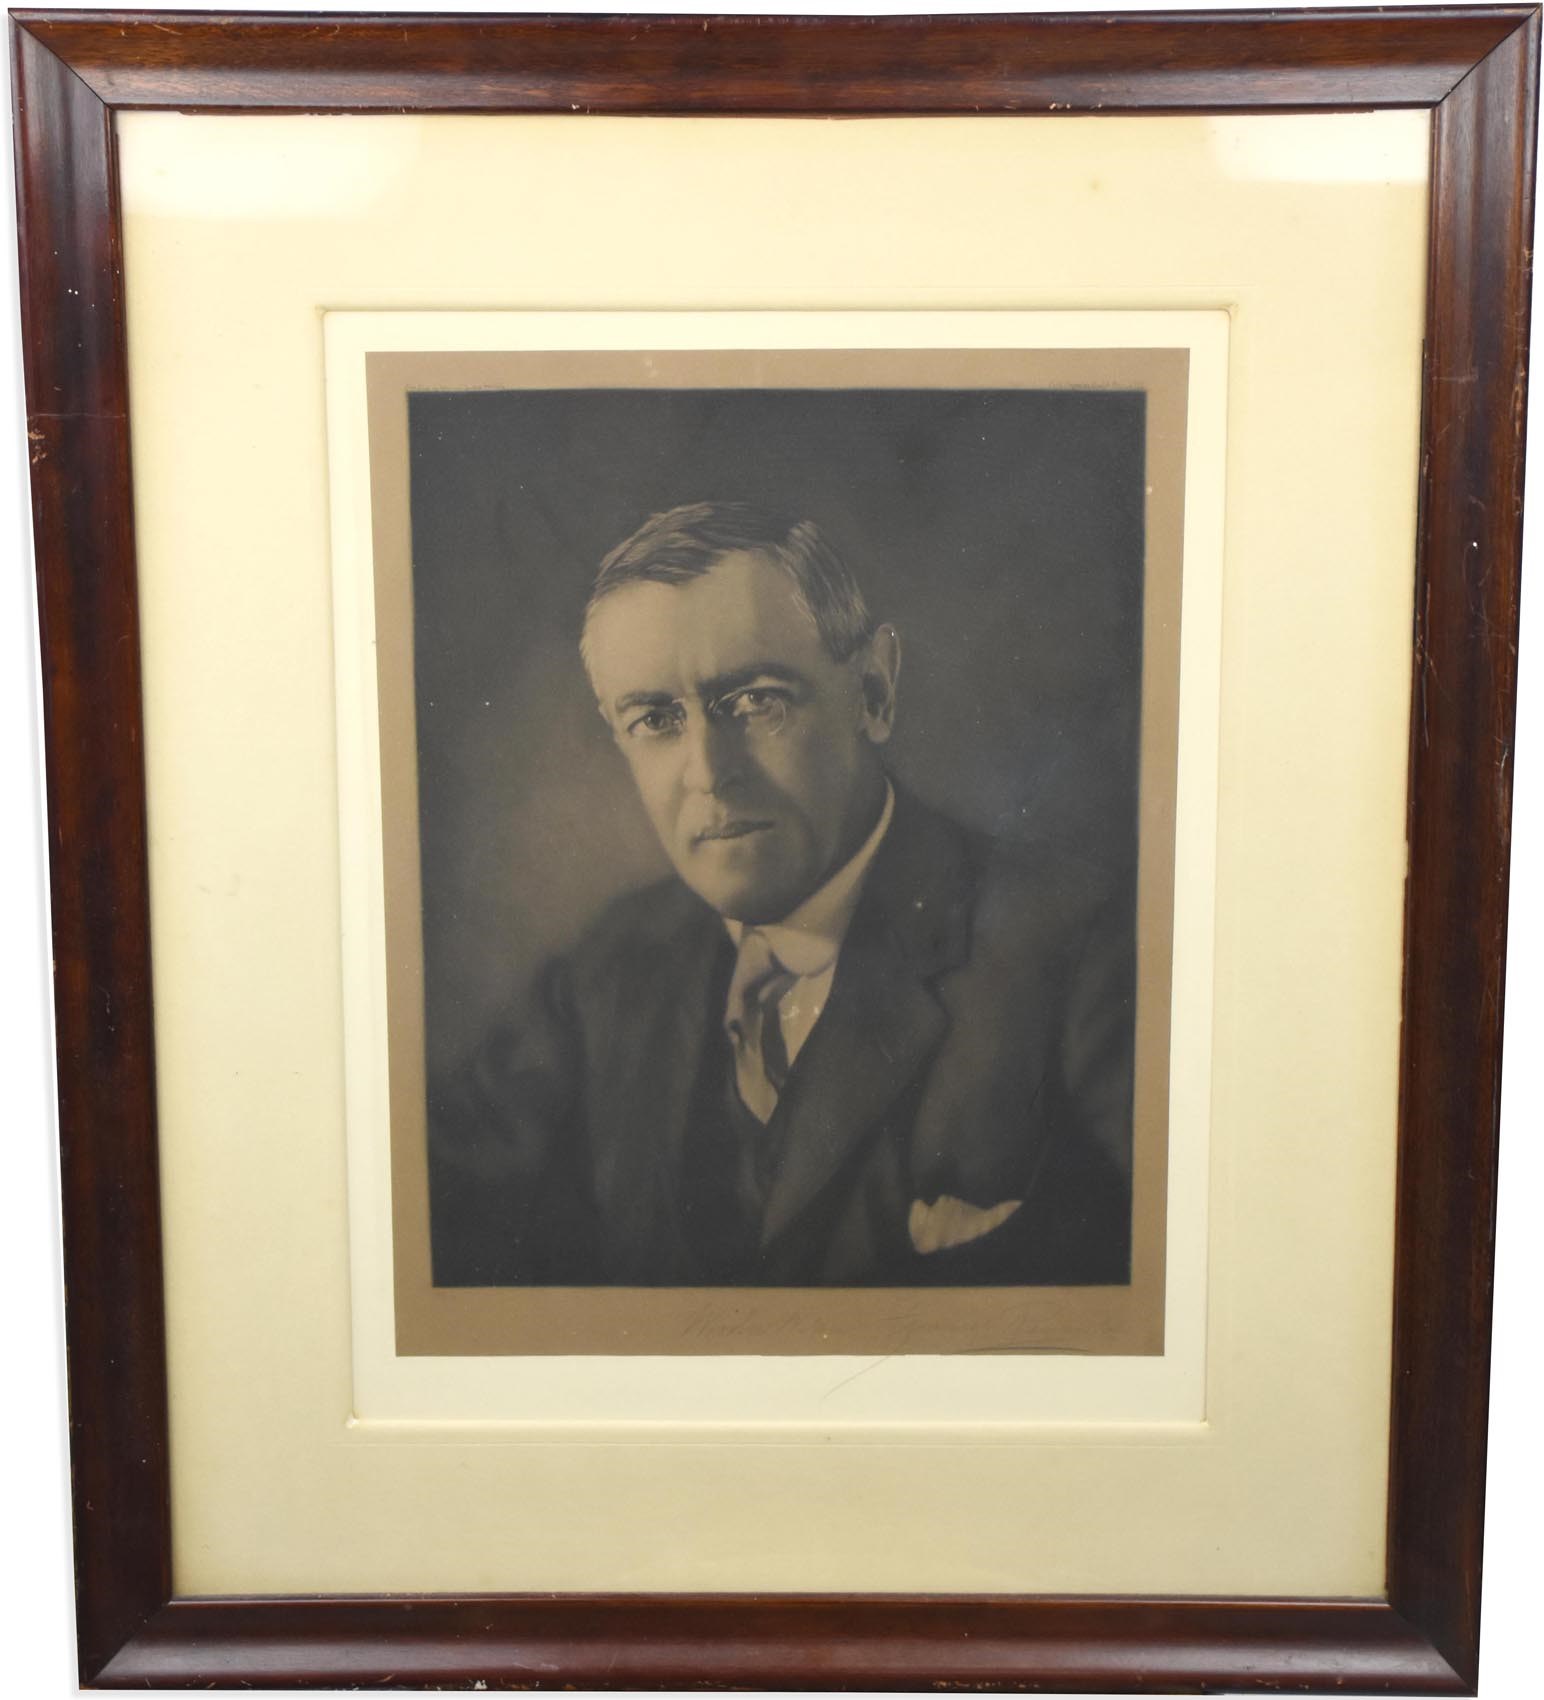 1916 Woodrow Wilson Signed Limited Edition Portrait Engraving